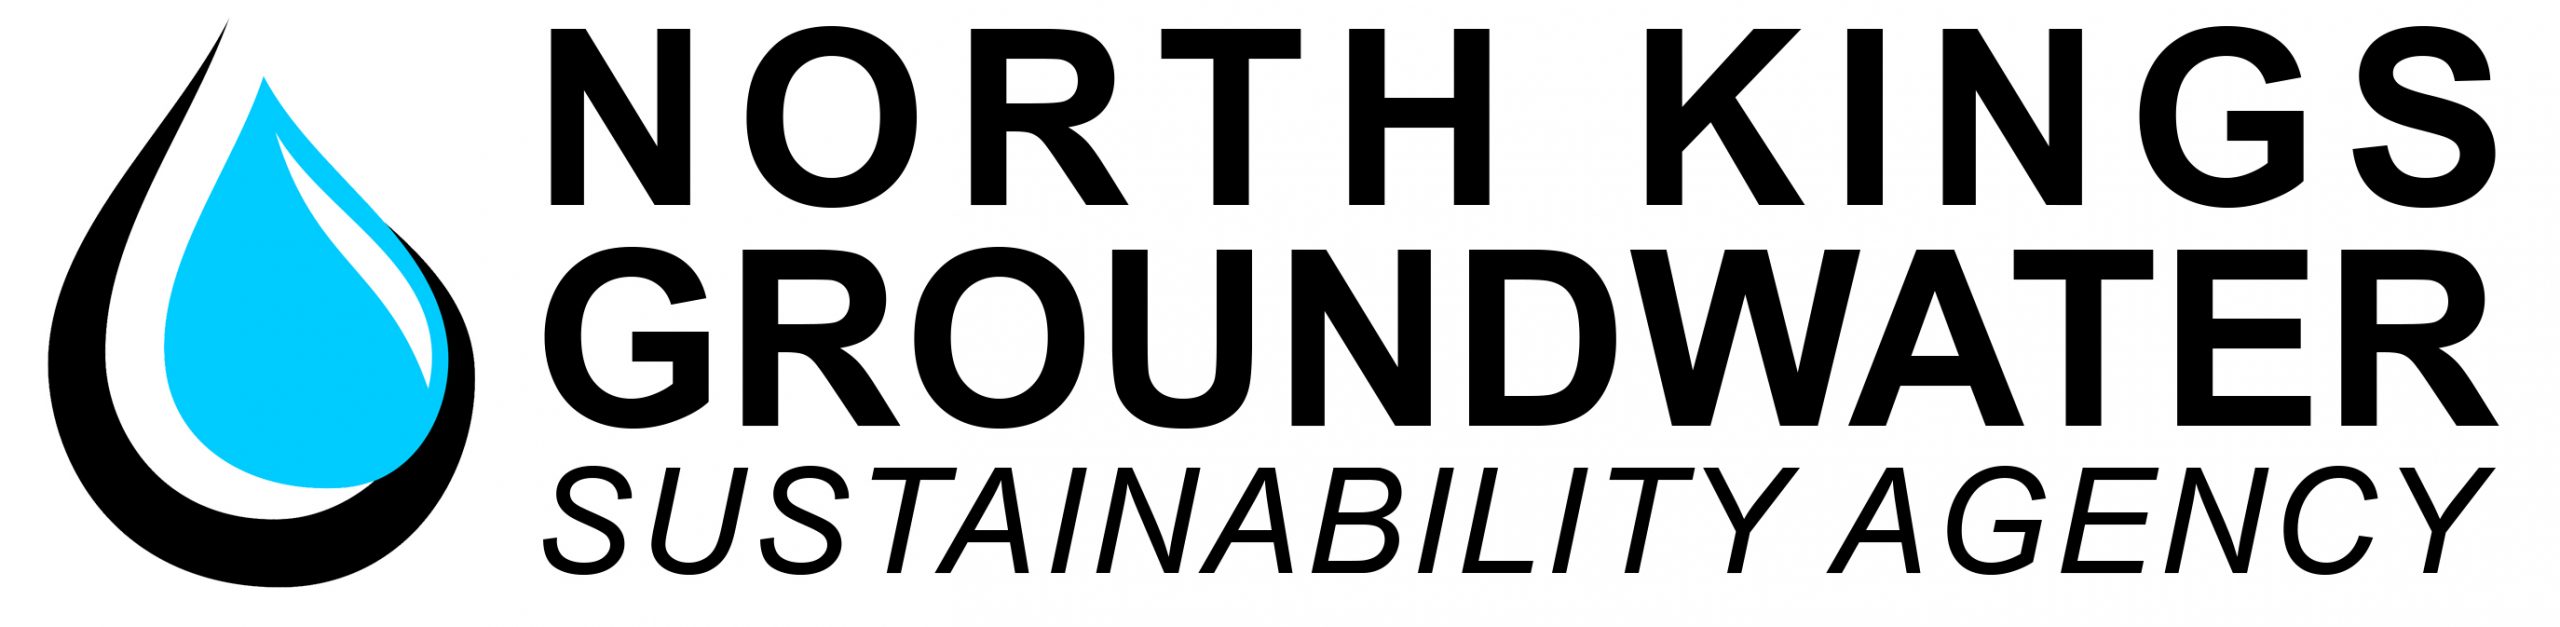 North Kings Groundwater Sustainability Agency